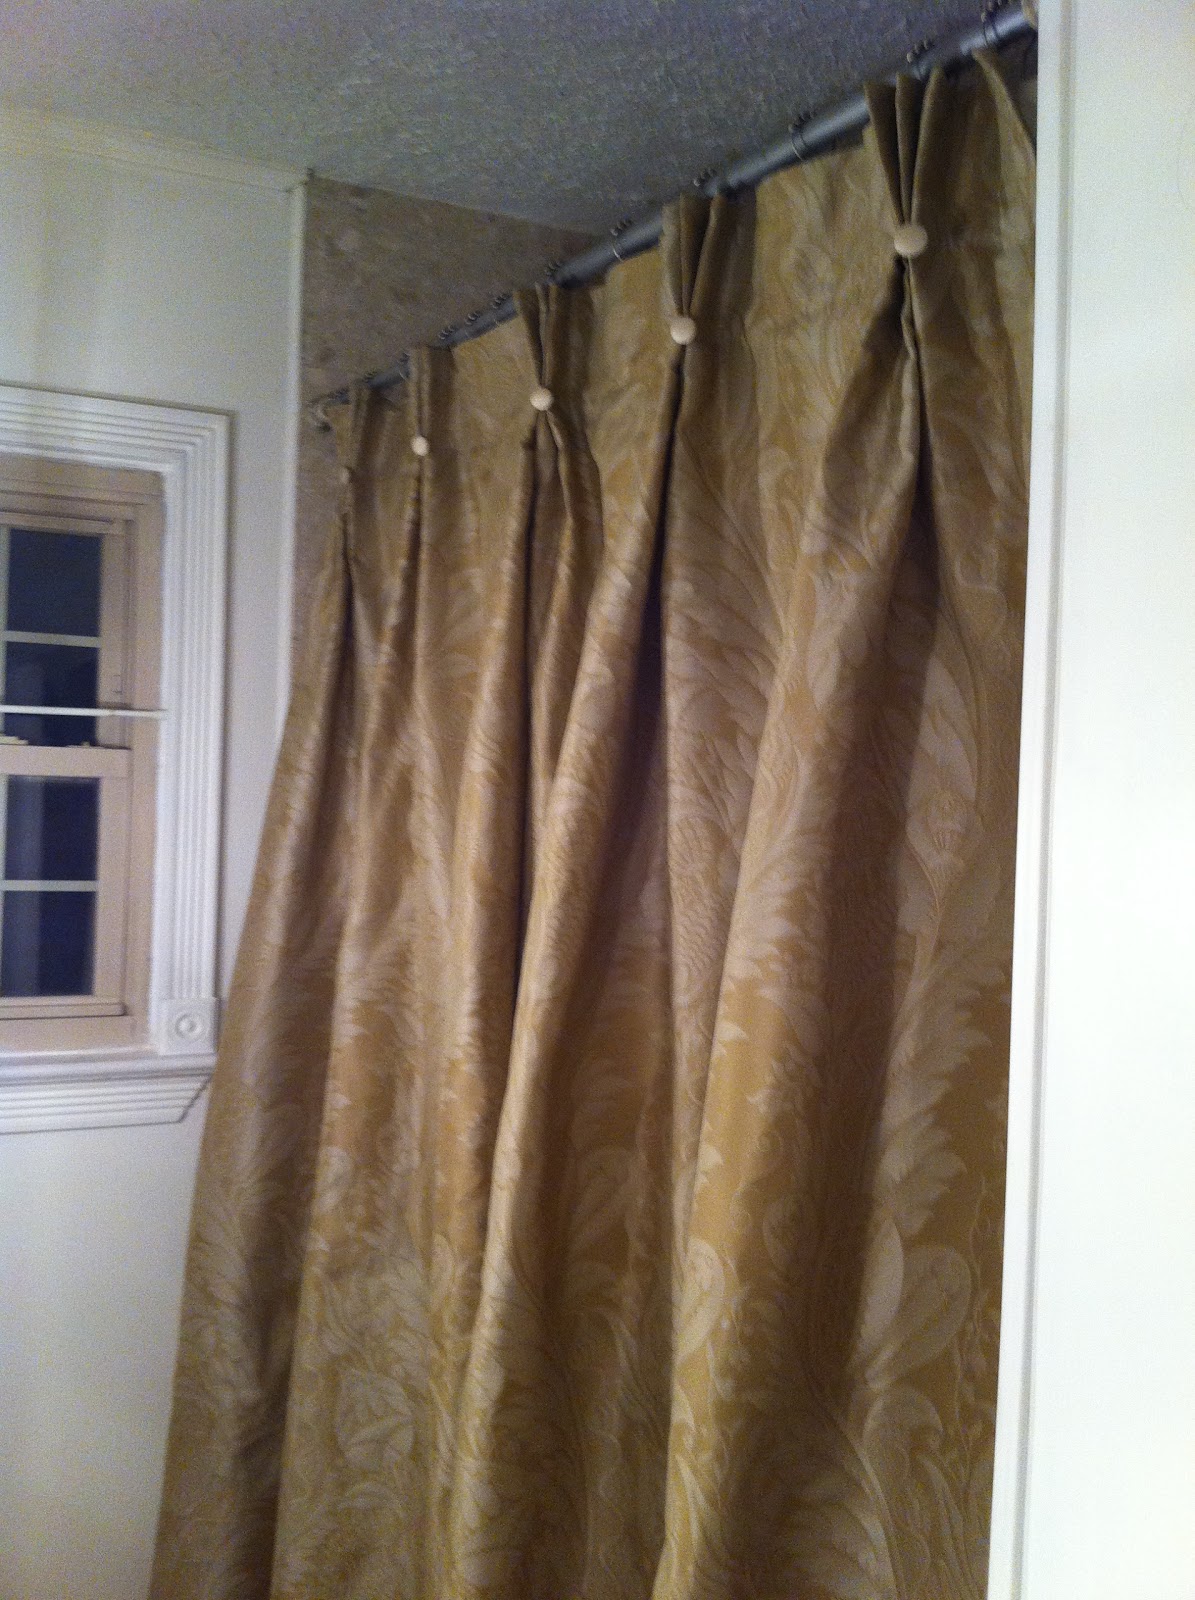 Teal And Beige Curtains 